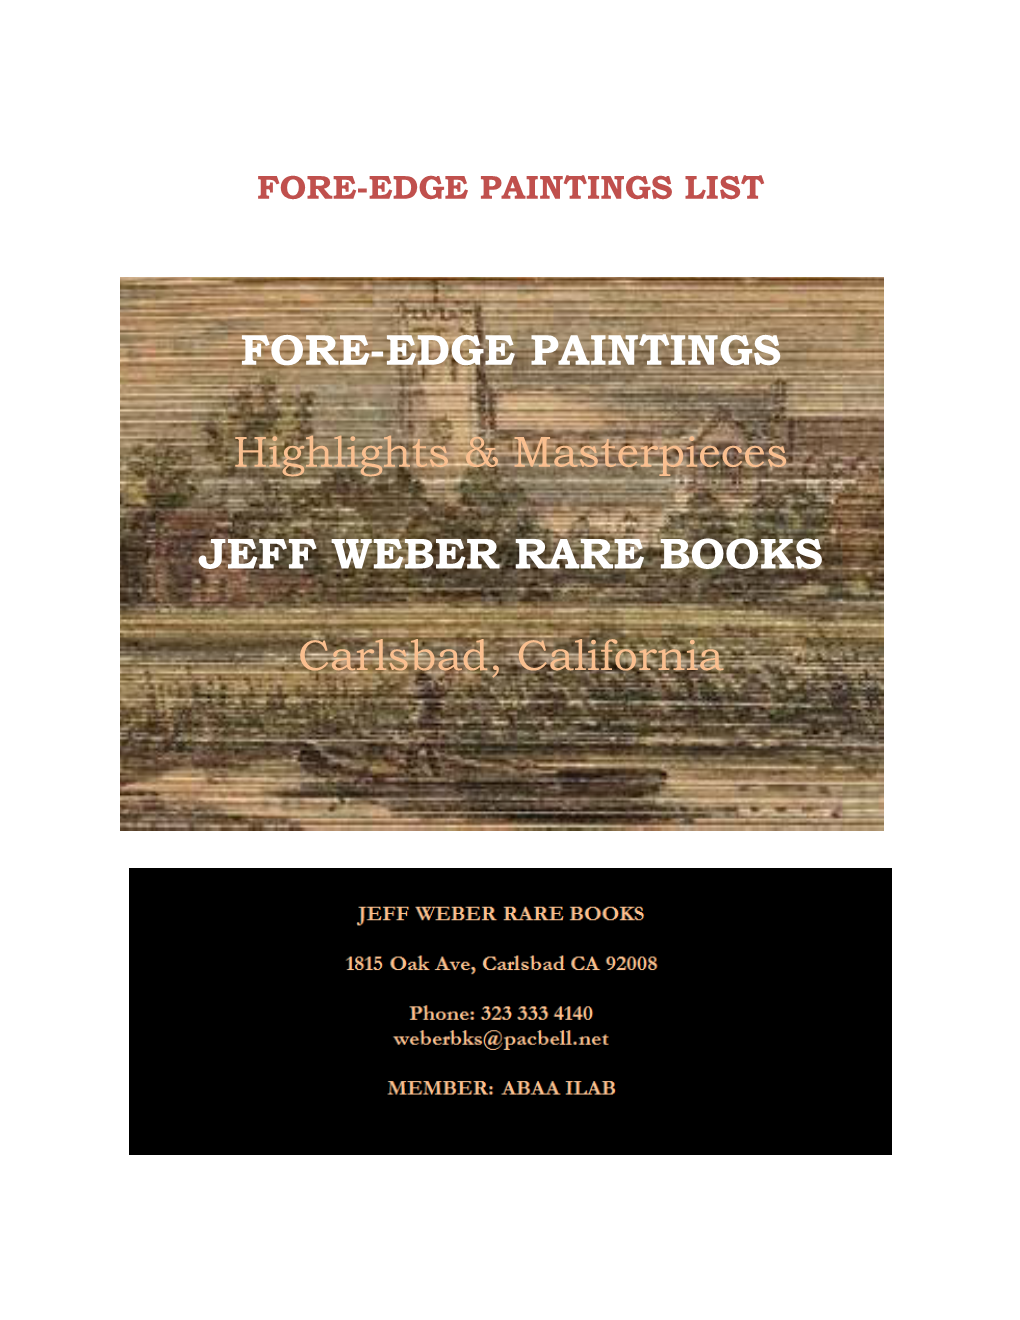 Fore-Edge Painting List January 2017